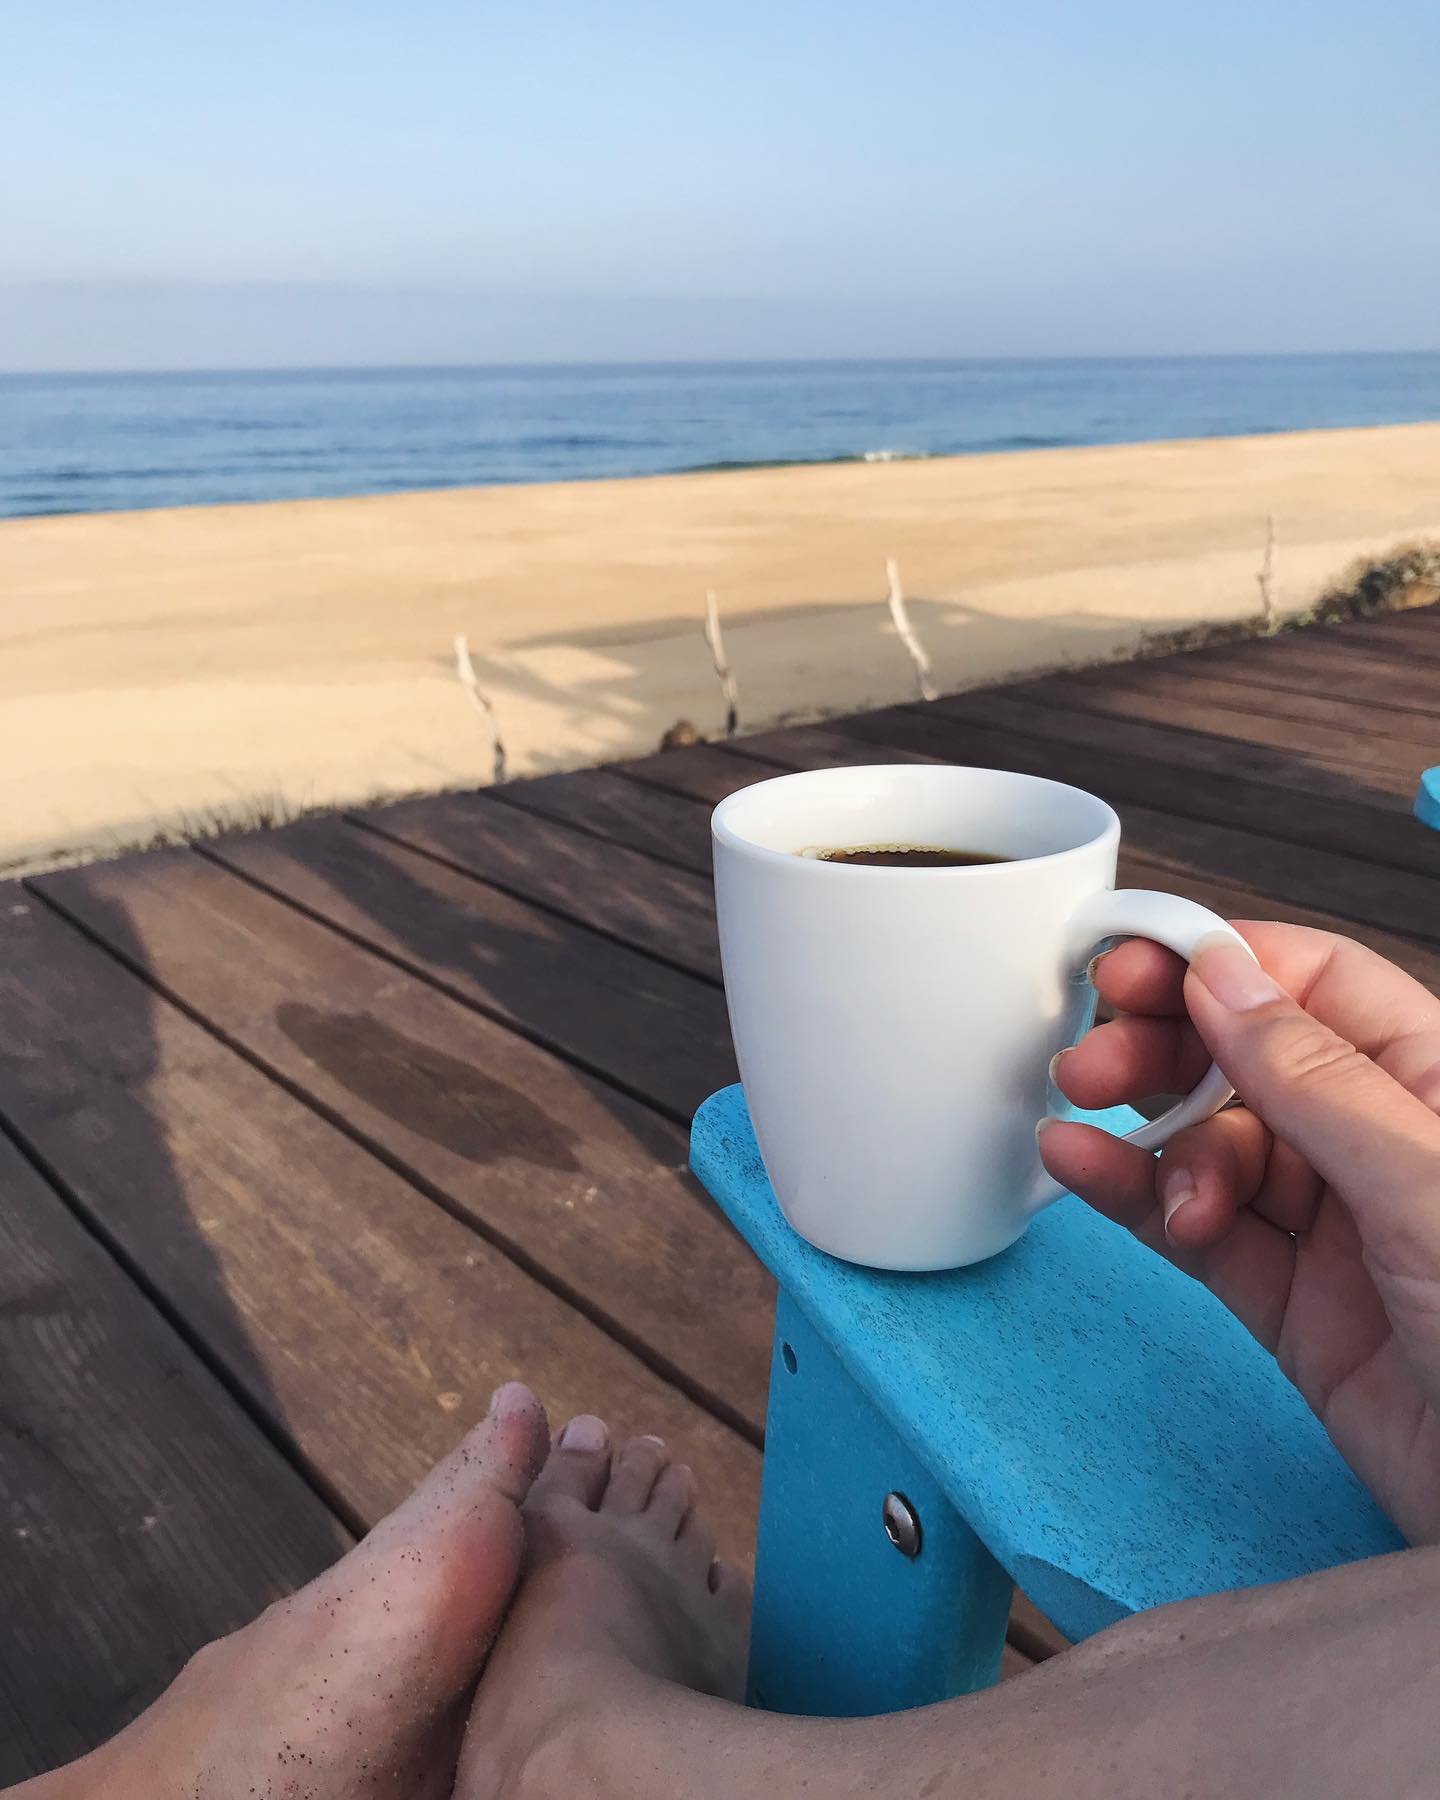 On the last day of our Anandamaya Baja retreat we did the following coffee meditation. Try it today on this Mindful Monday.

1. Settle in with a cup of coffee in your hands. Ground yourself in presence by connecting to the smell, the warmth and the w